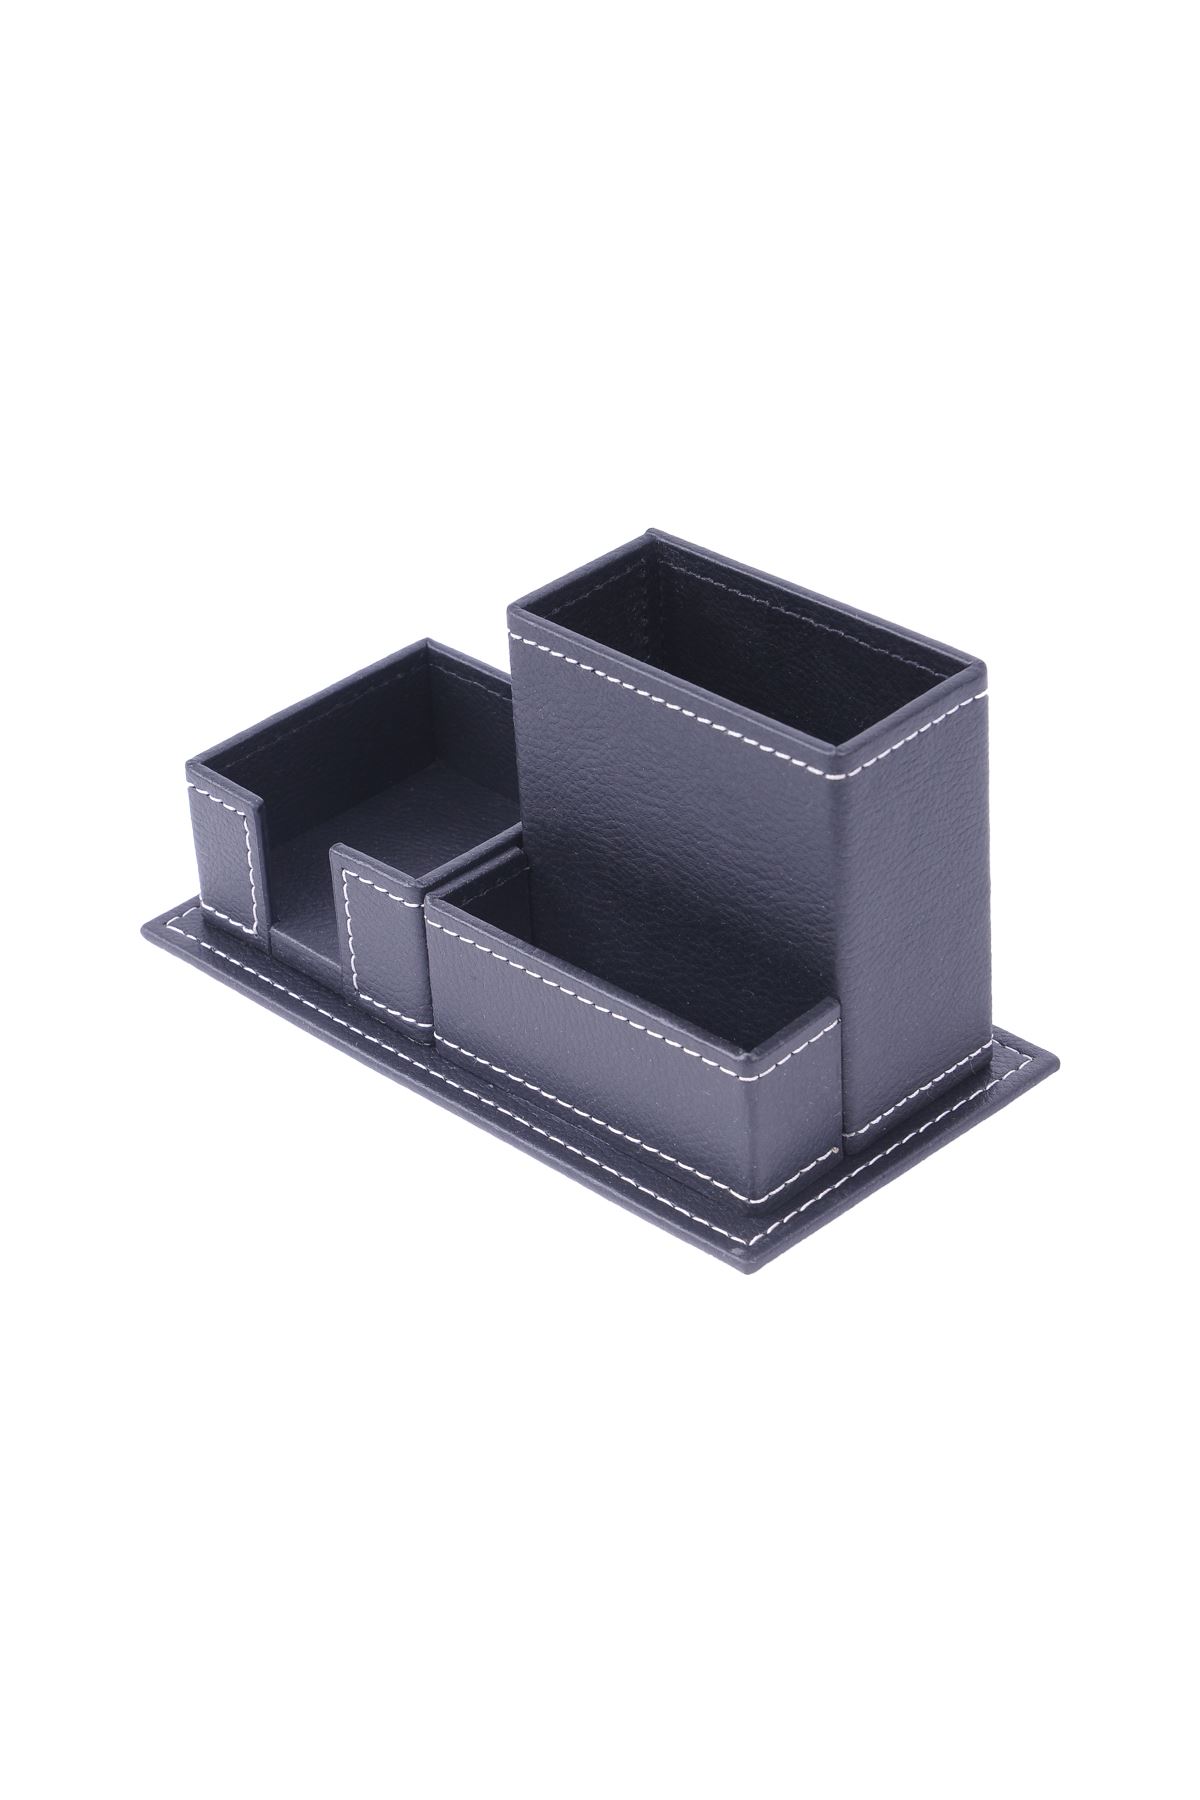 Double Document Tray With 2 Accessories Gray| Desk Set Accessories | Desktop Accessories | Desk Accessories | Desk Organizers